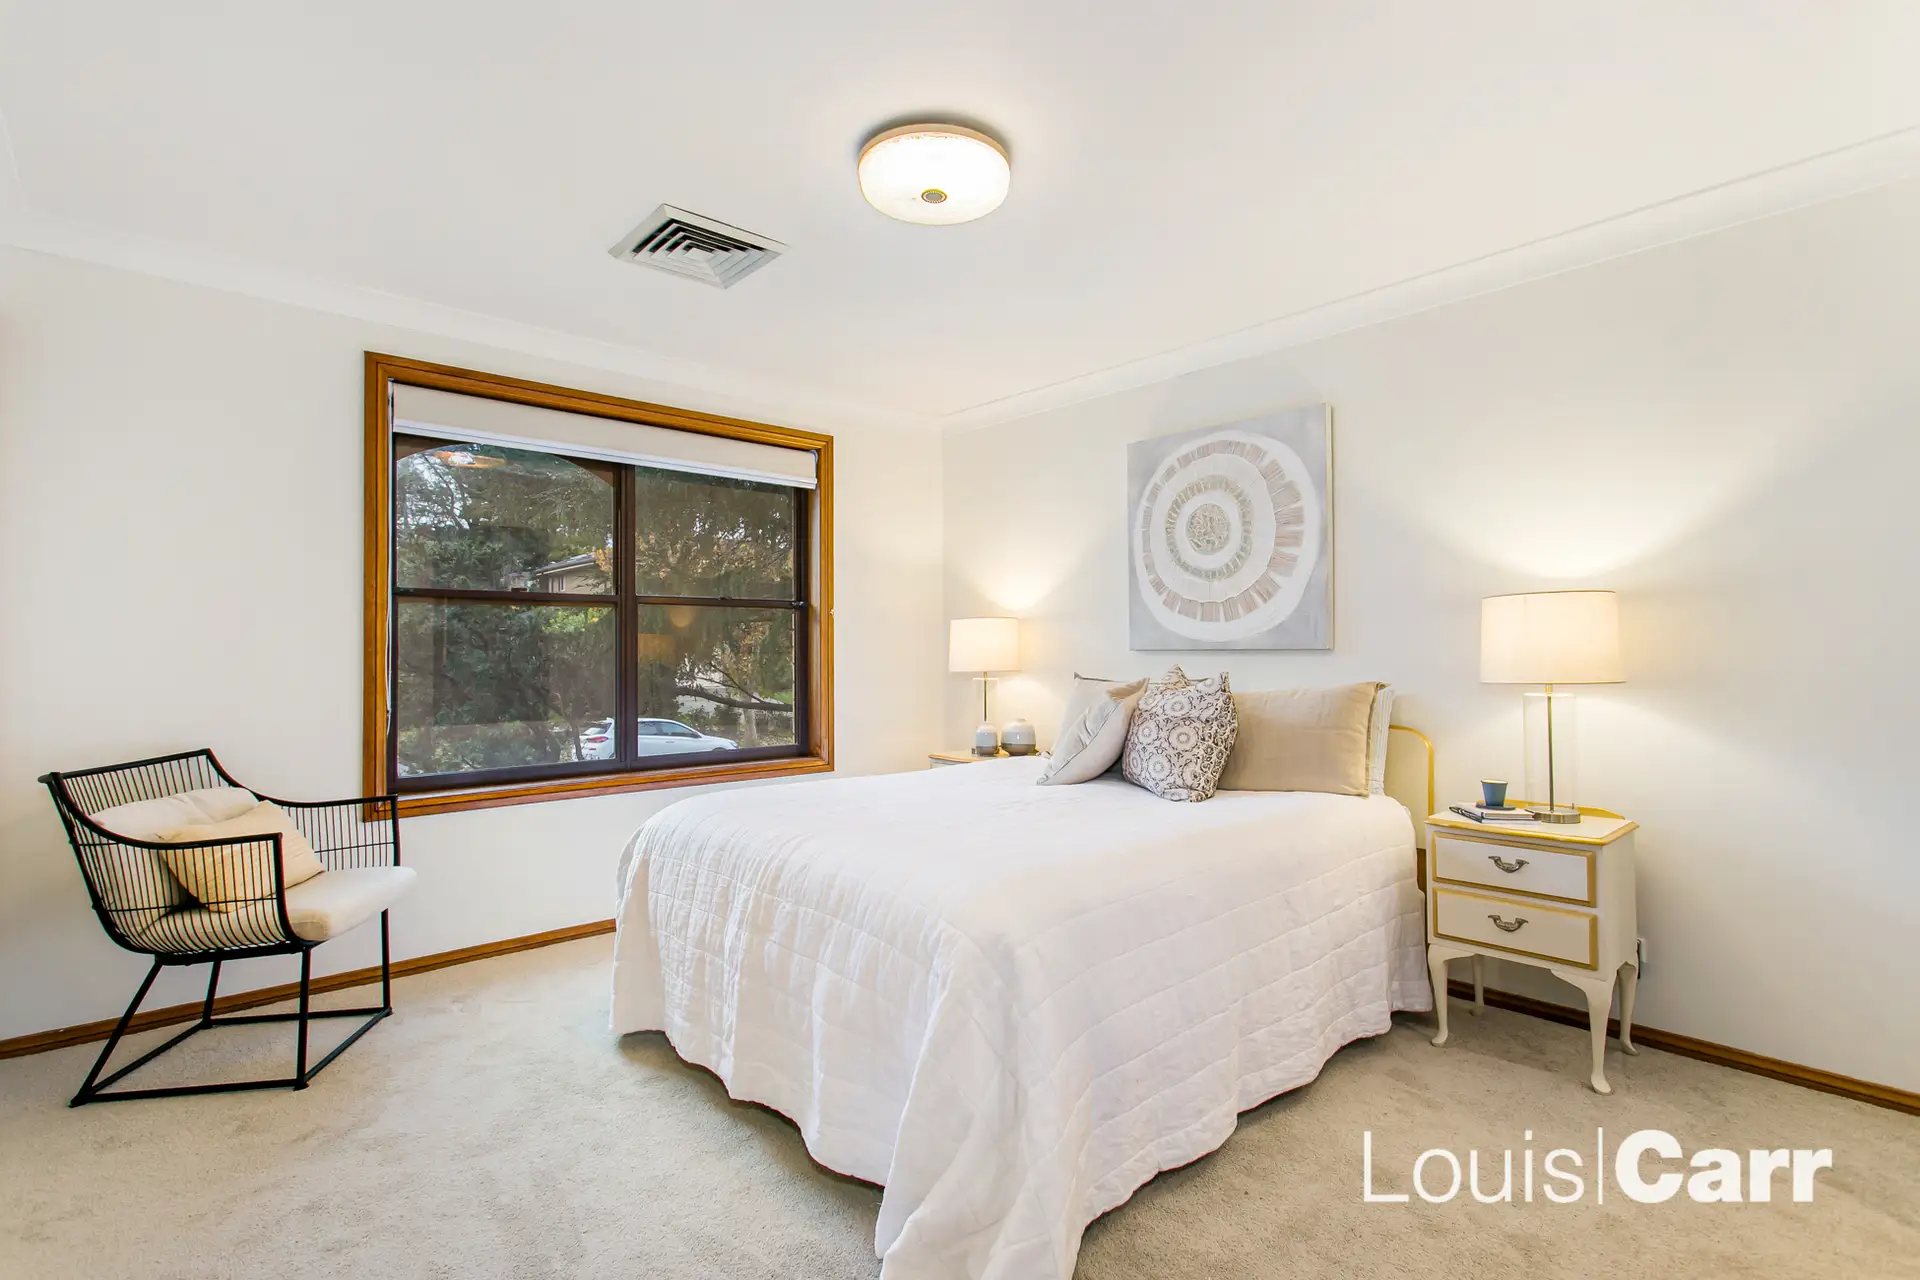 Photo #9: 7 Radley Place, Cherrybrook - Sold by Louis Carr Real Estate